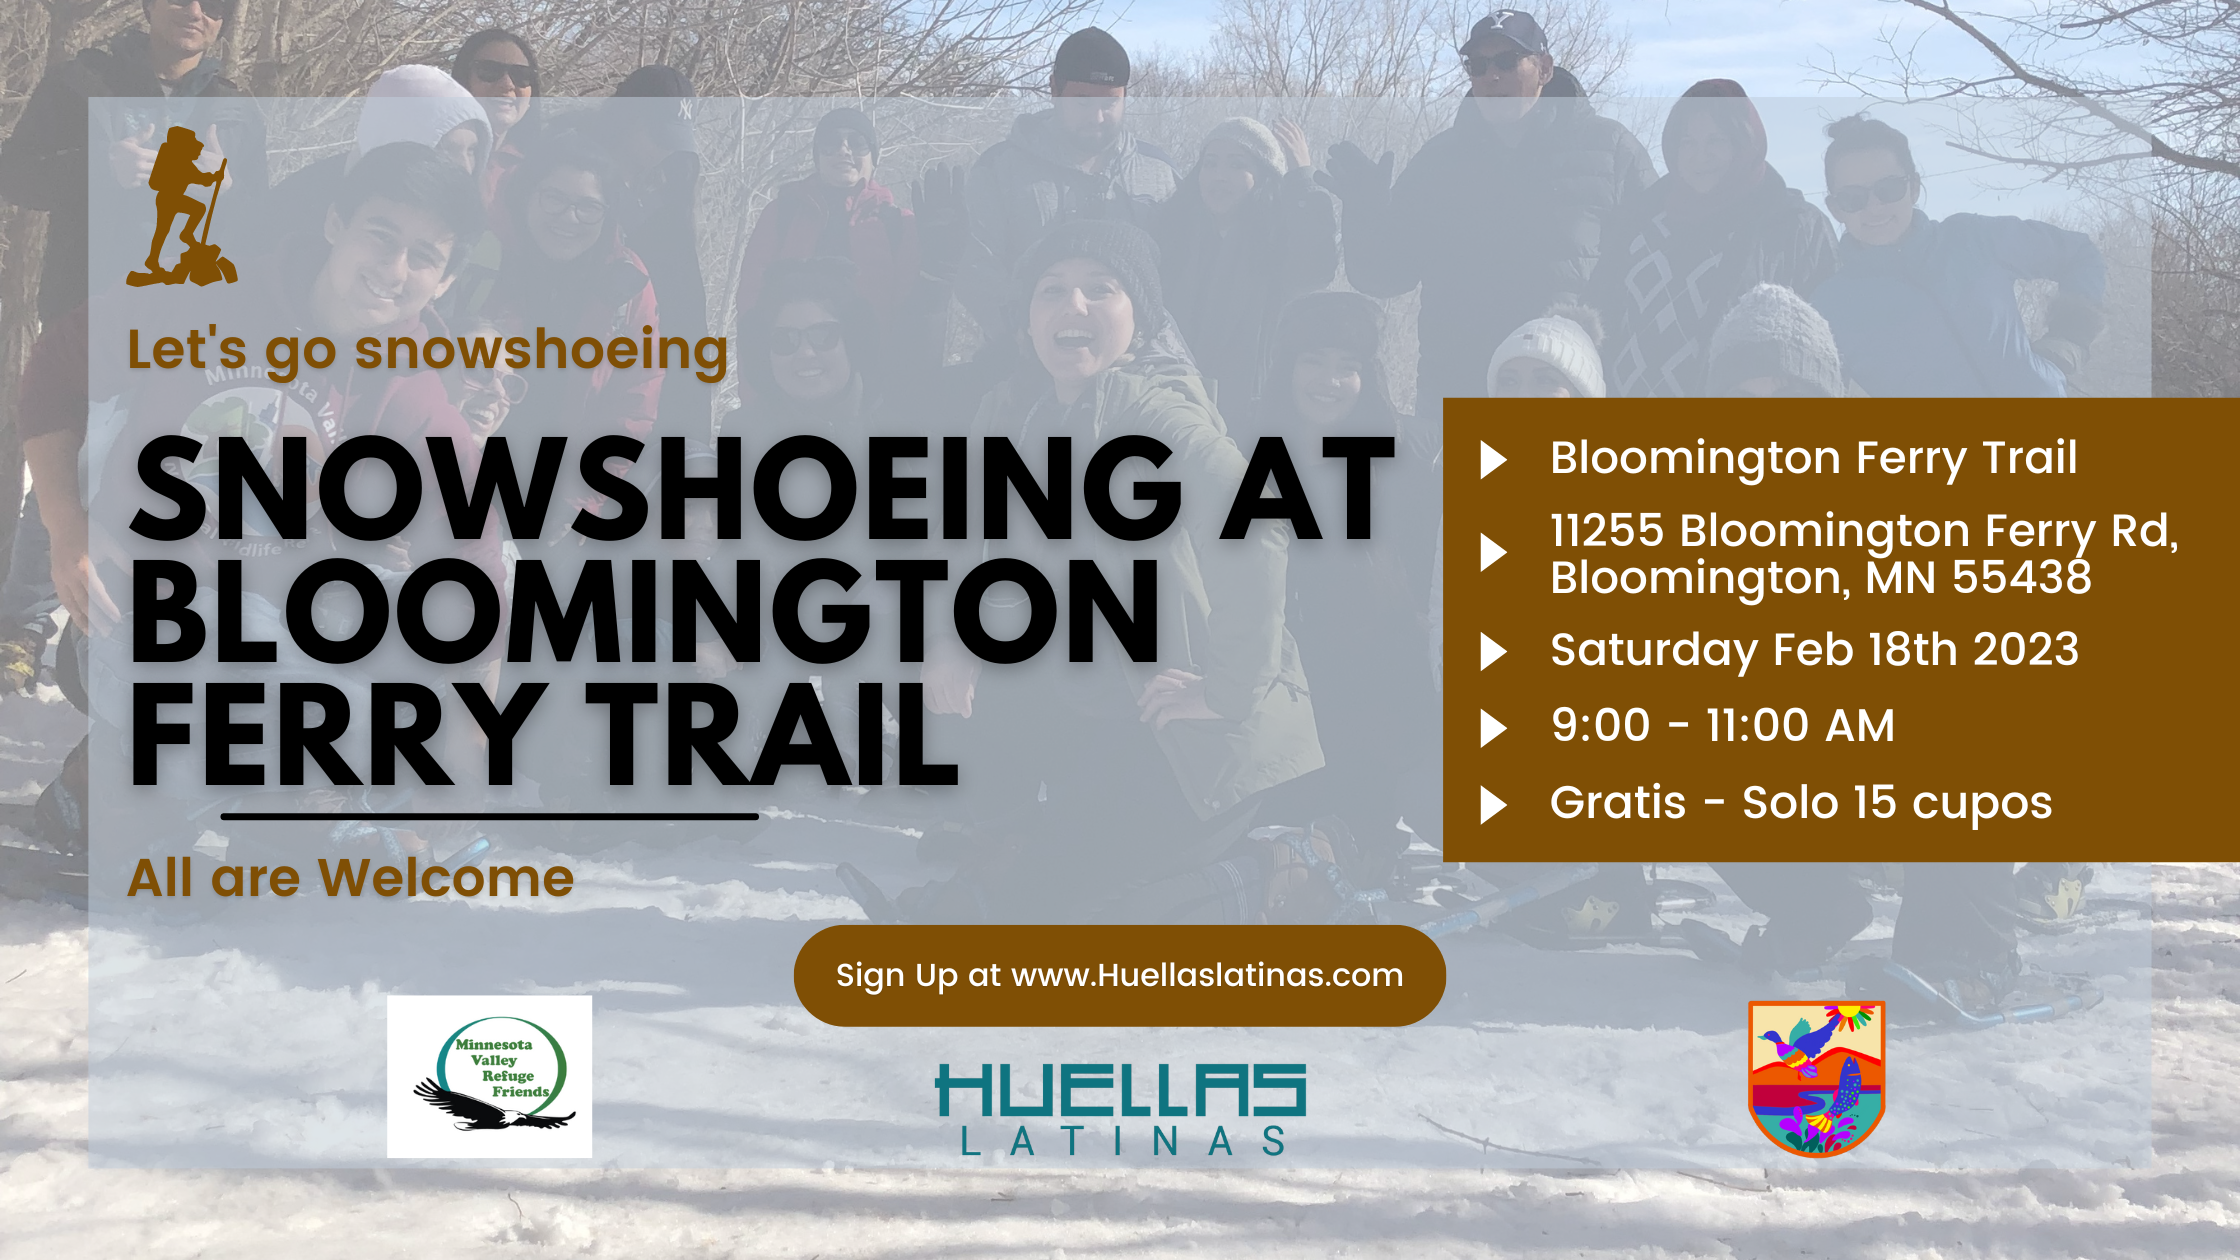 Snowshoeing at Bloomington Ferry Trail